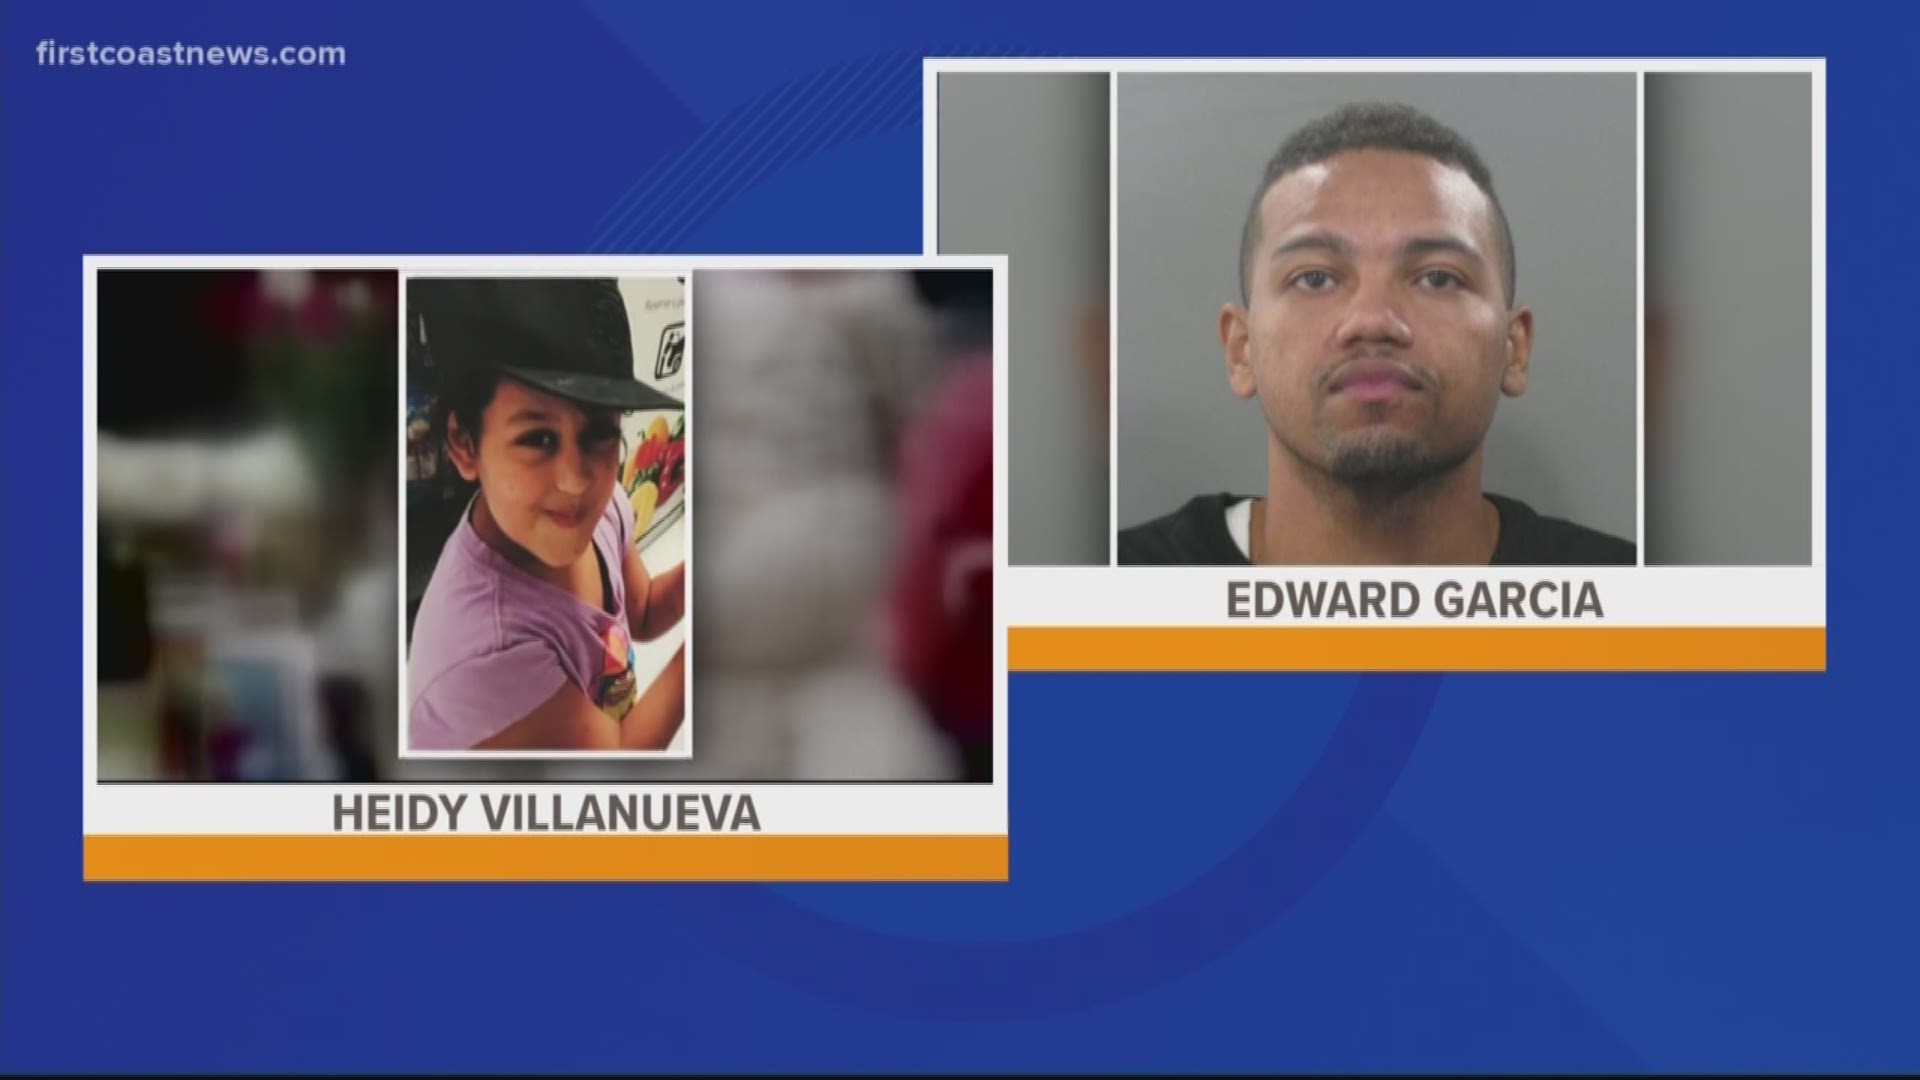 Police are looking for Edward Garcia, 28, who is wanted in the murder case of 7-year-old Heidy Villanueva.